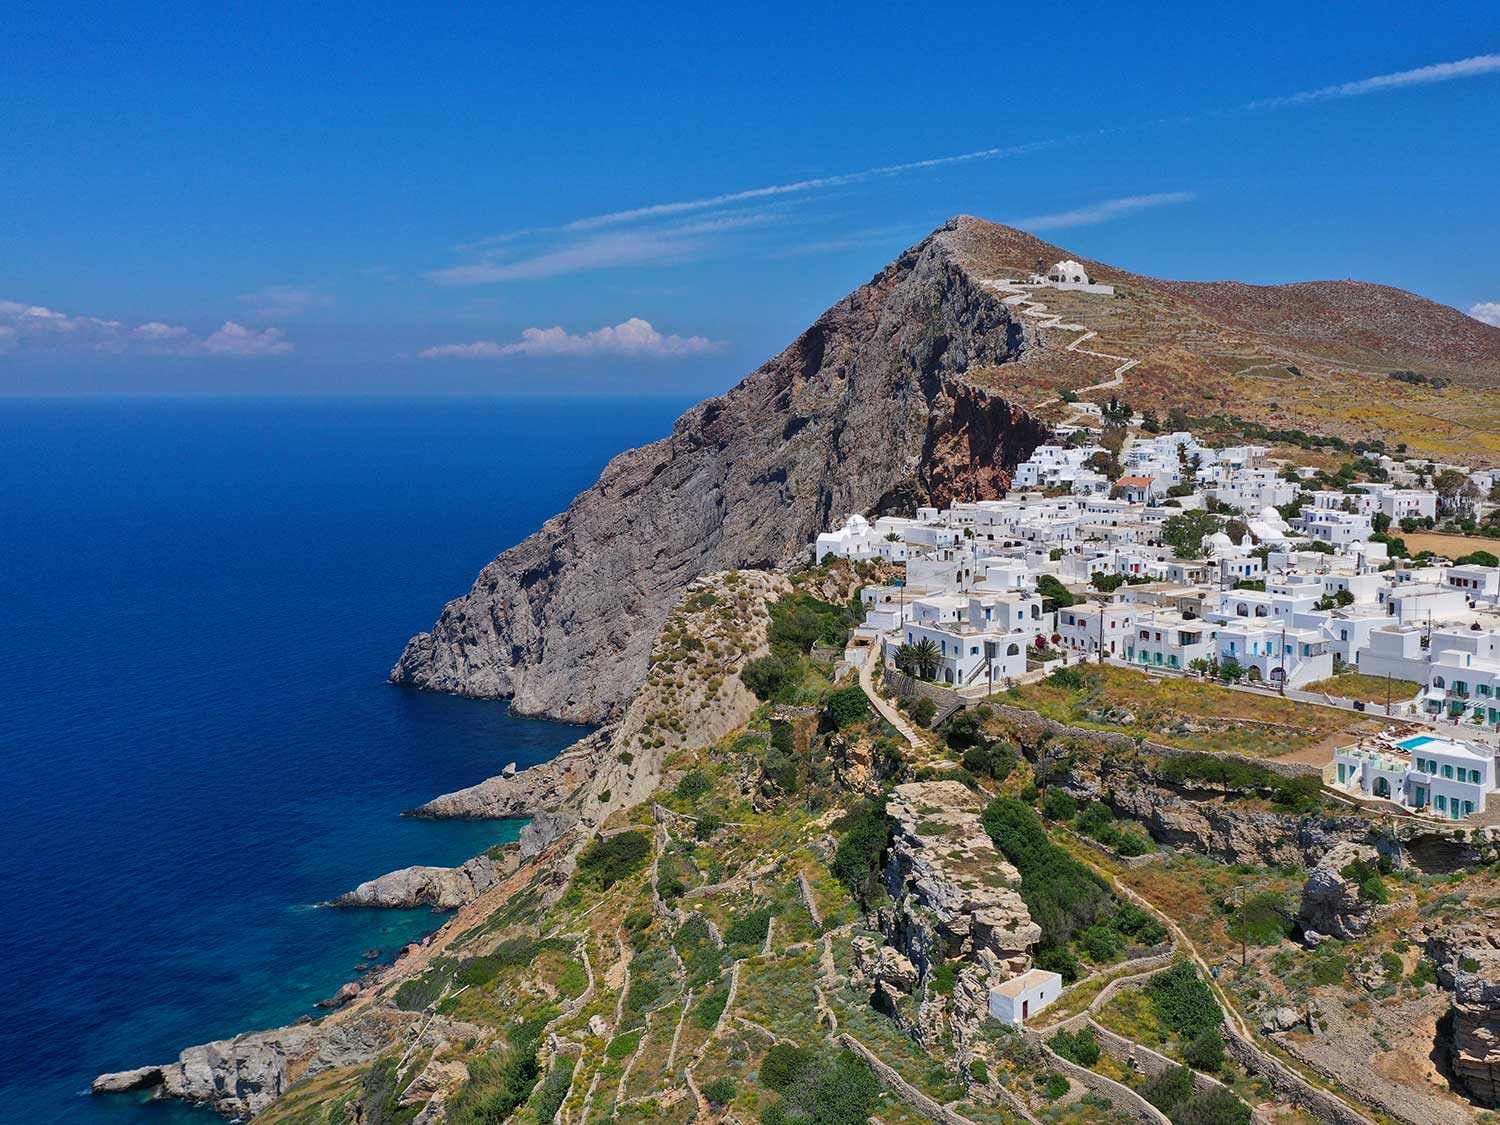 A hillside Grecian town of white buildings with blue shutters.